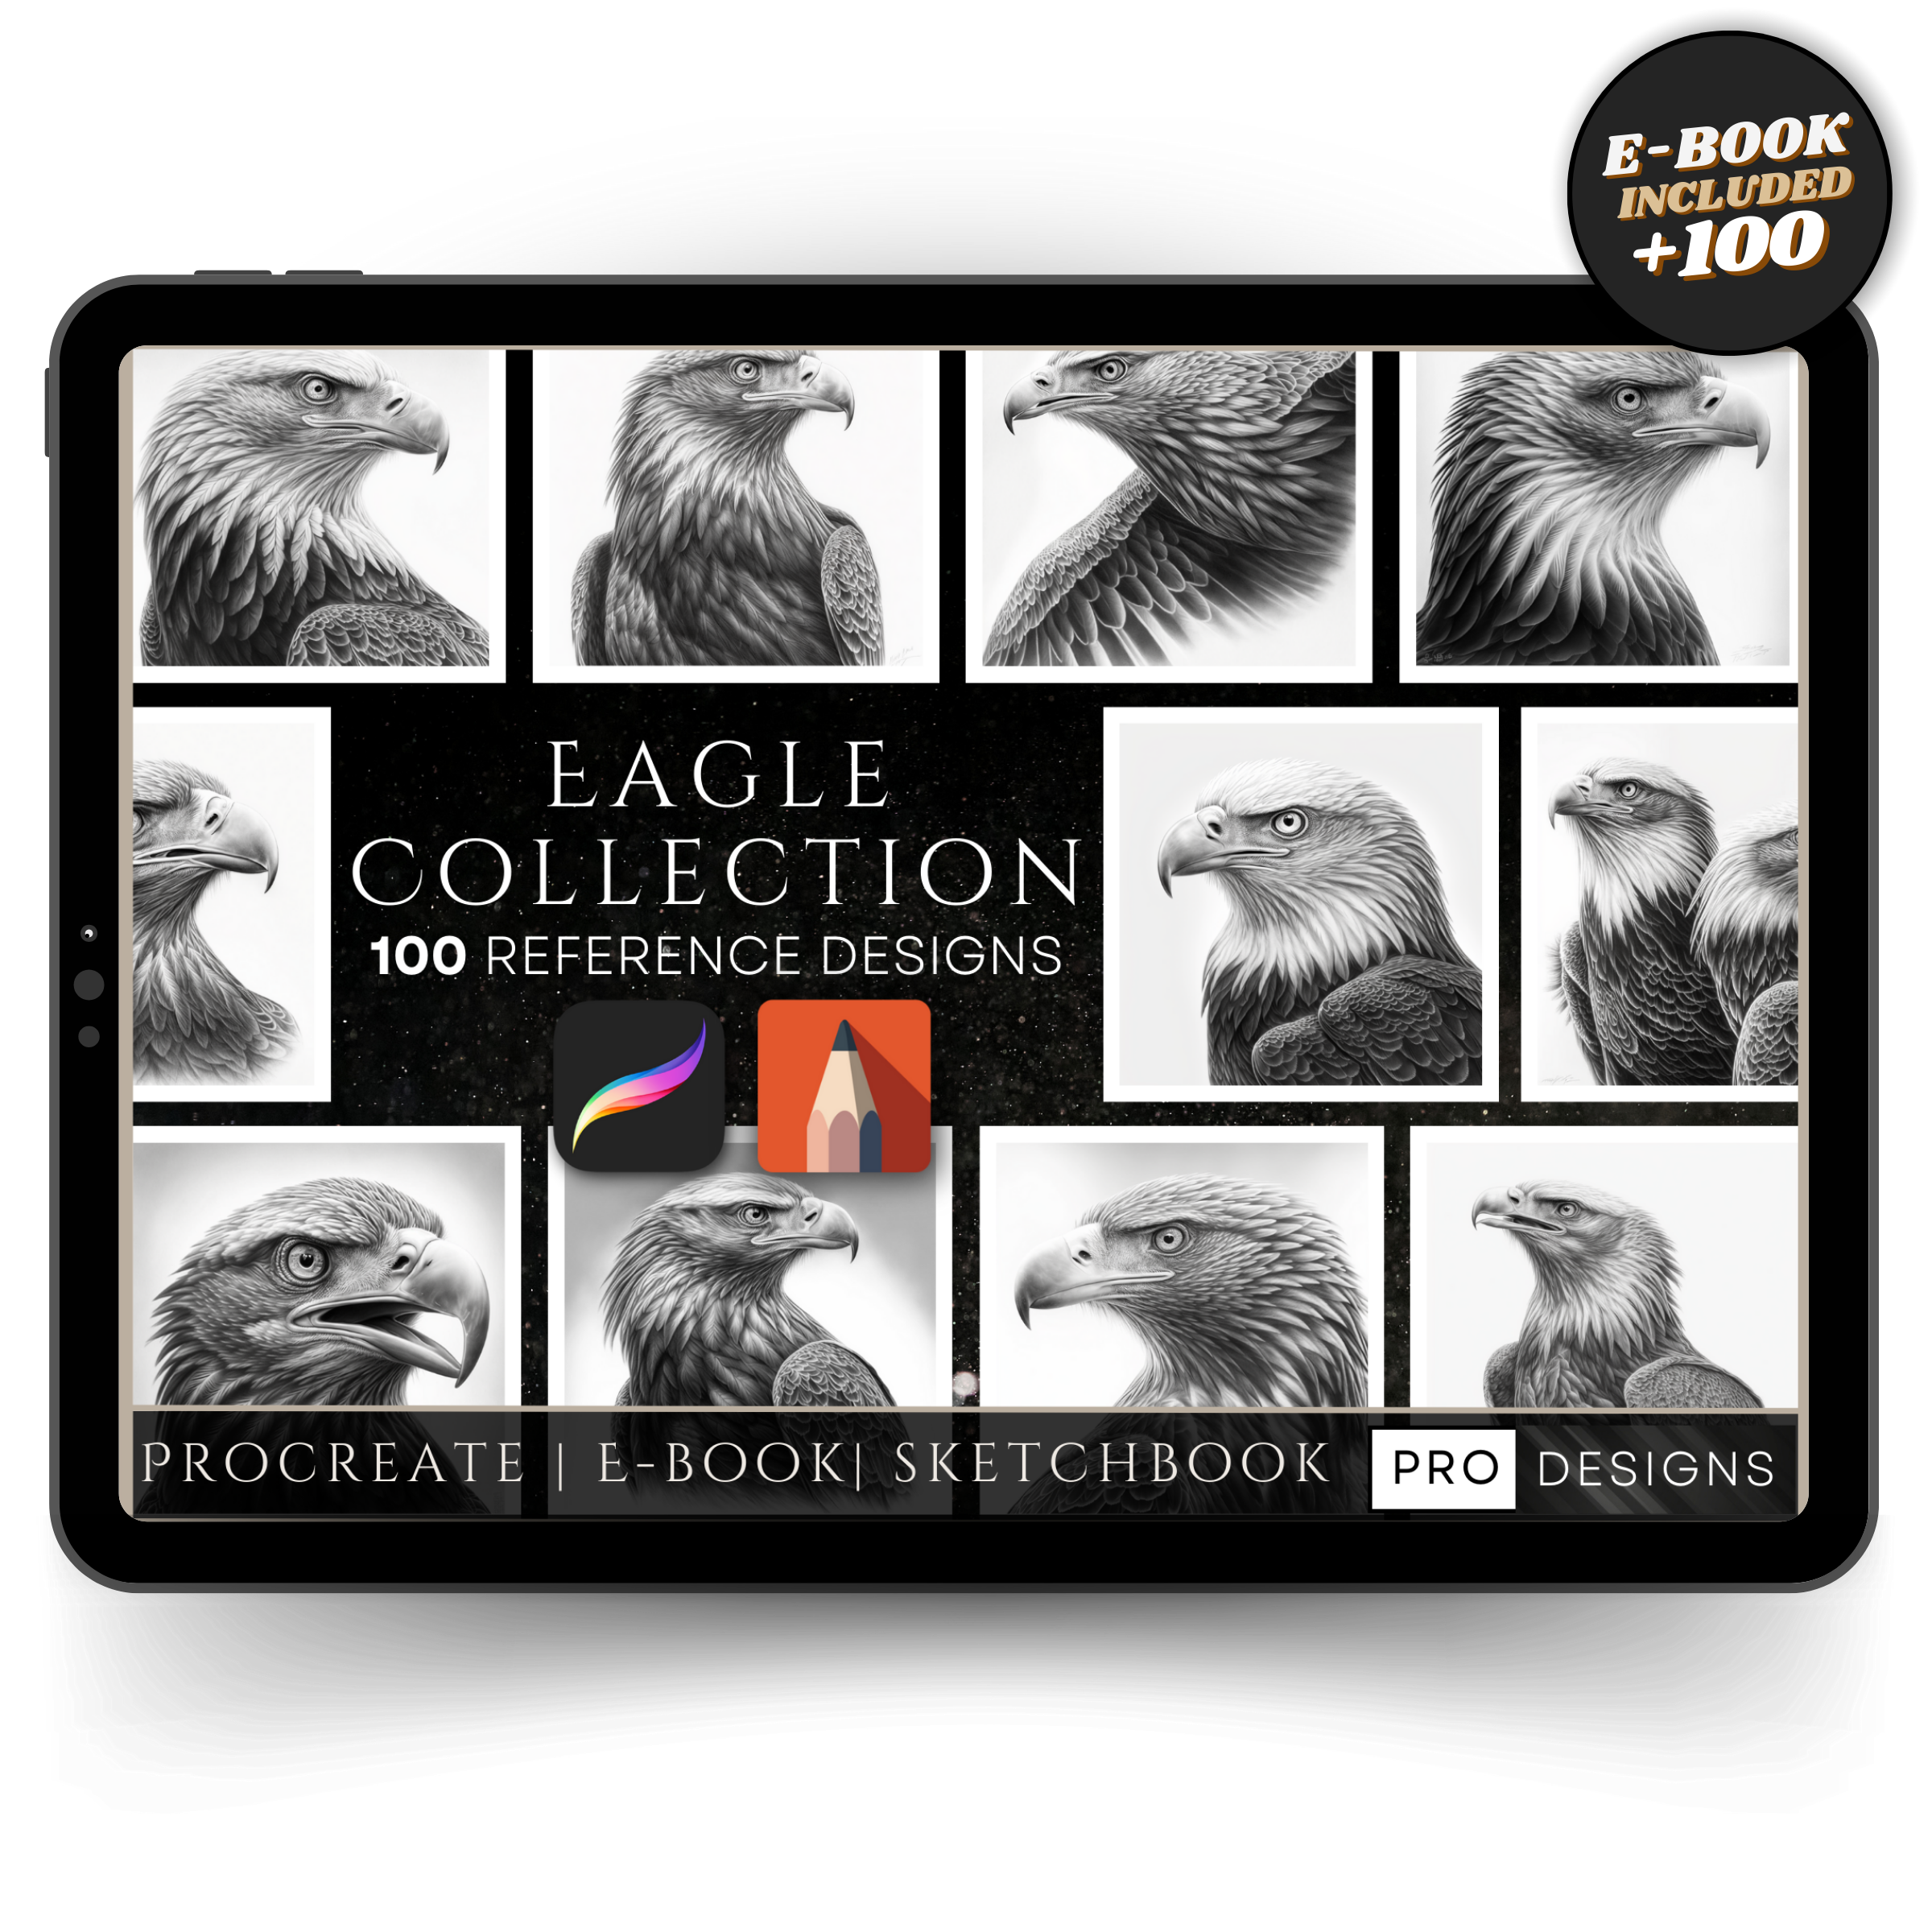 "Majestic Skies" - The Ultimate Eagle Collection